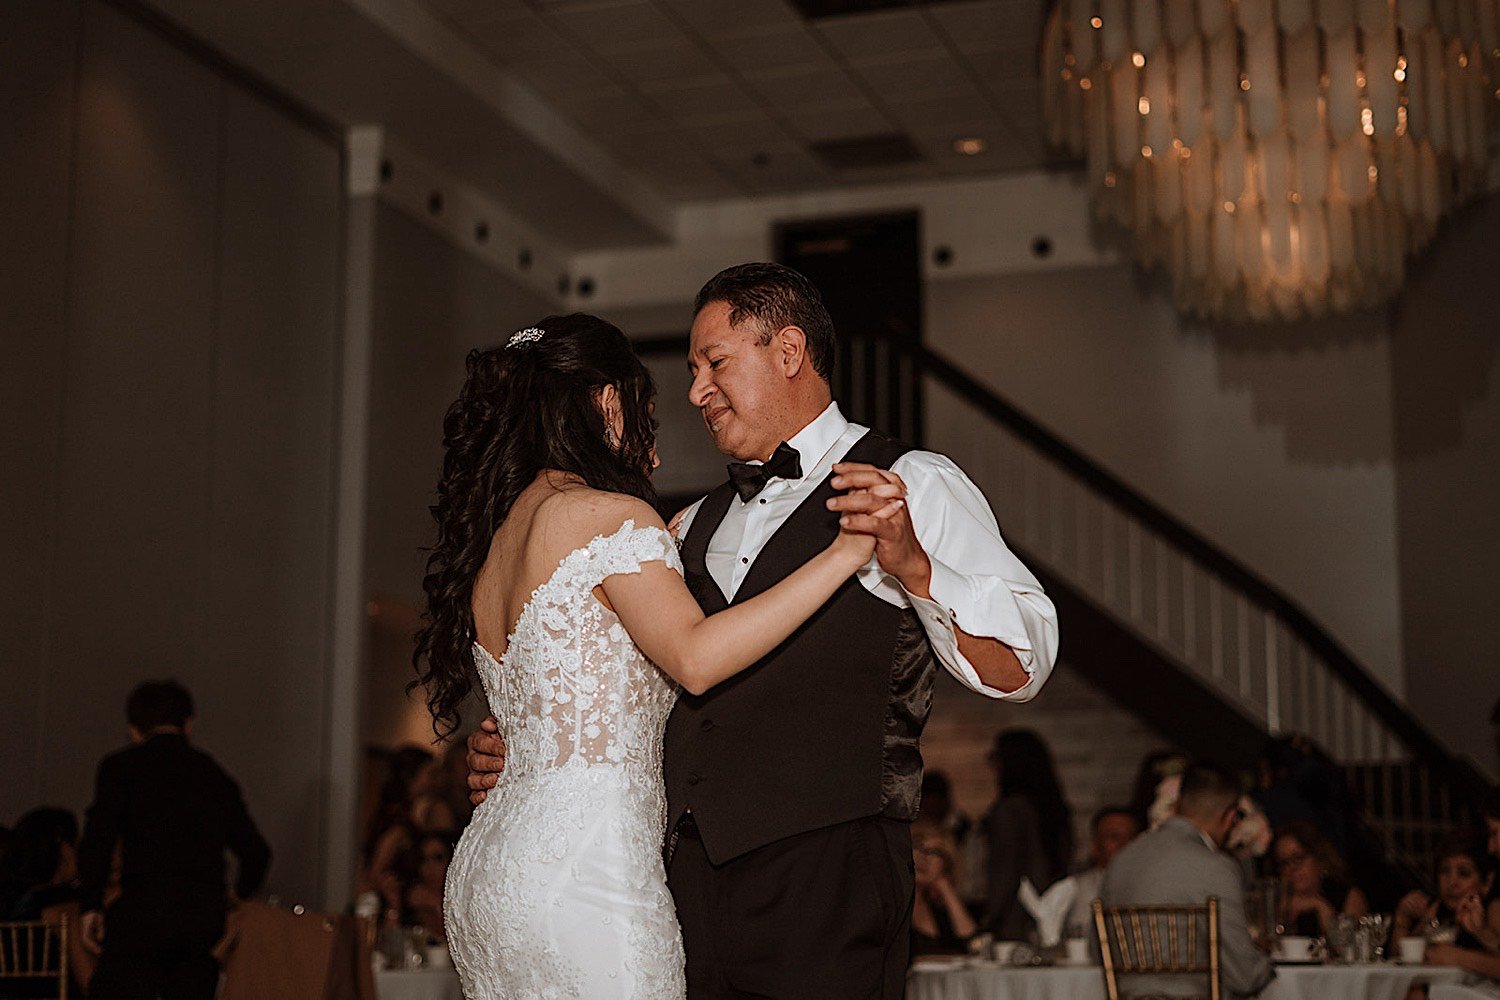 Bride shares dance with her father during Chicagoland ballroom wedding reception